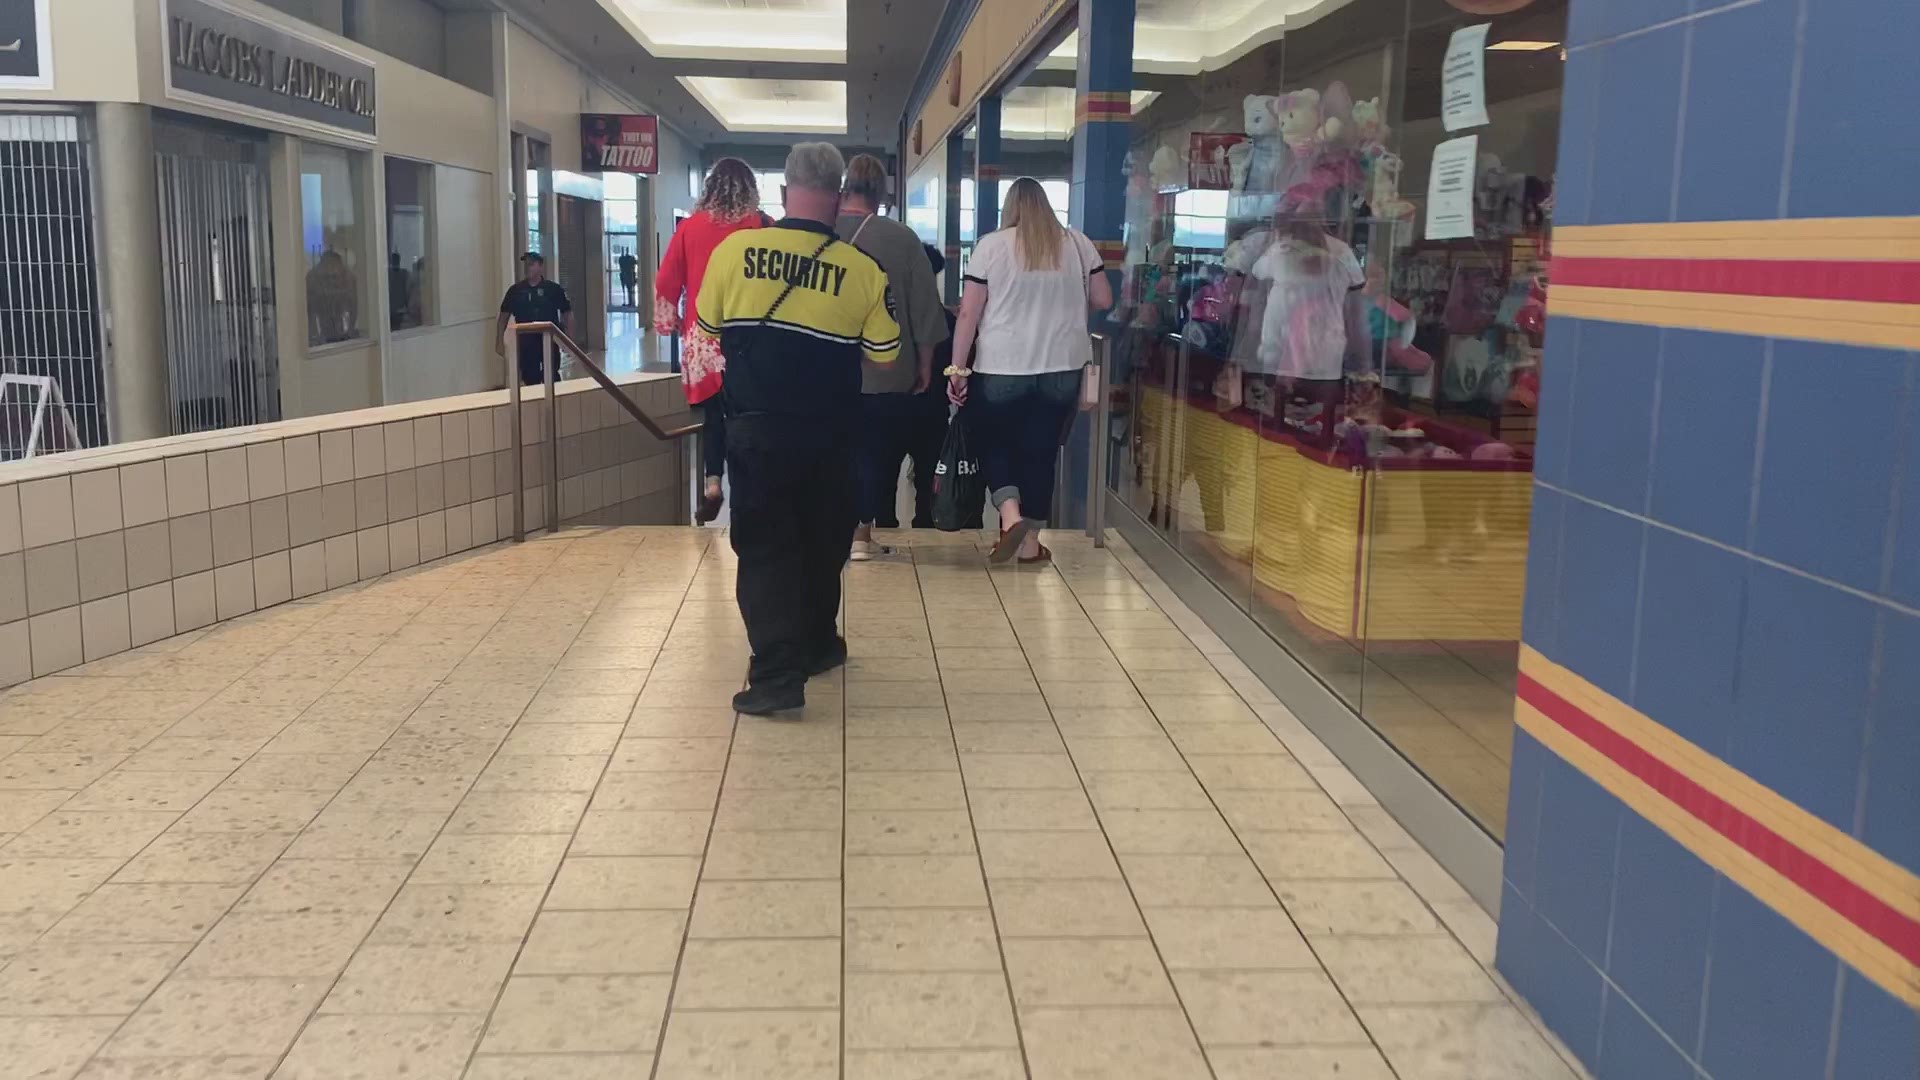 What we know: Reports of shooting at NorthPark Center were result